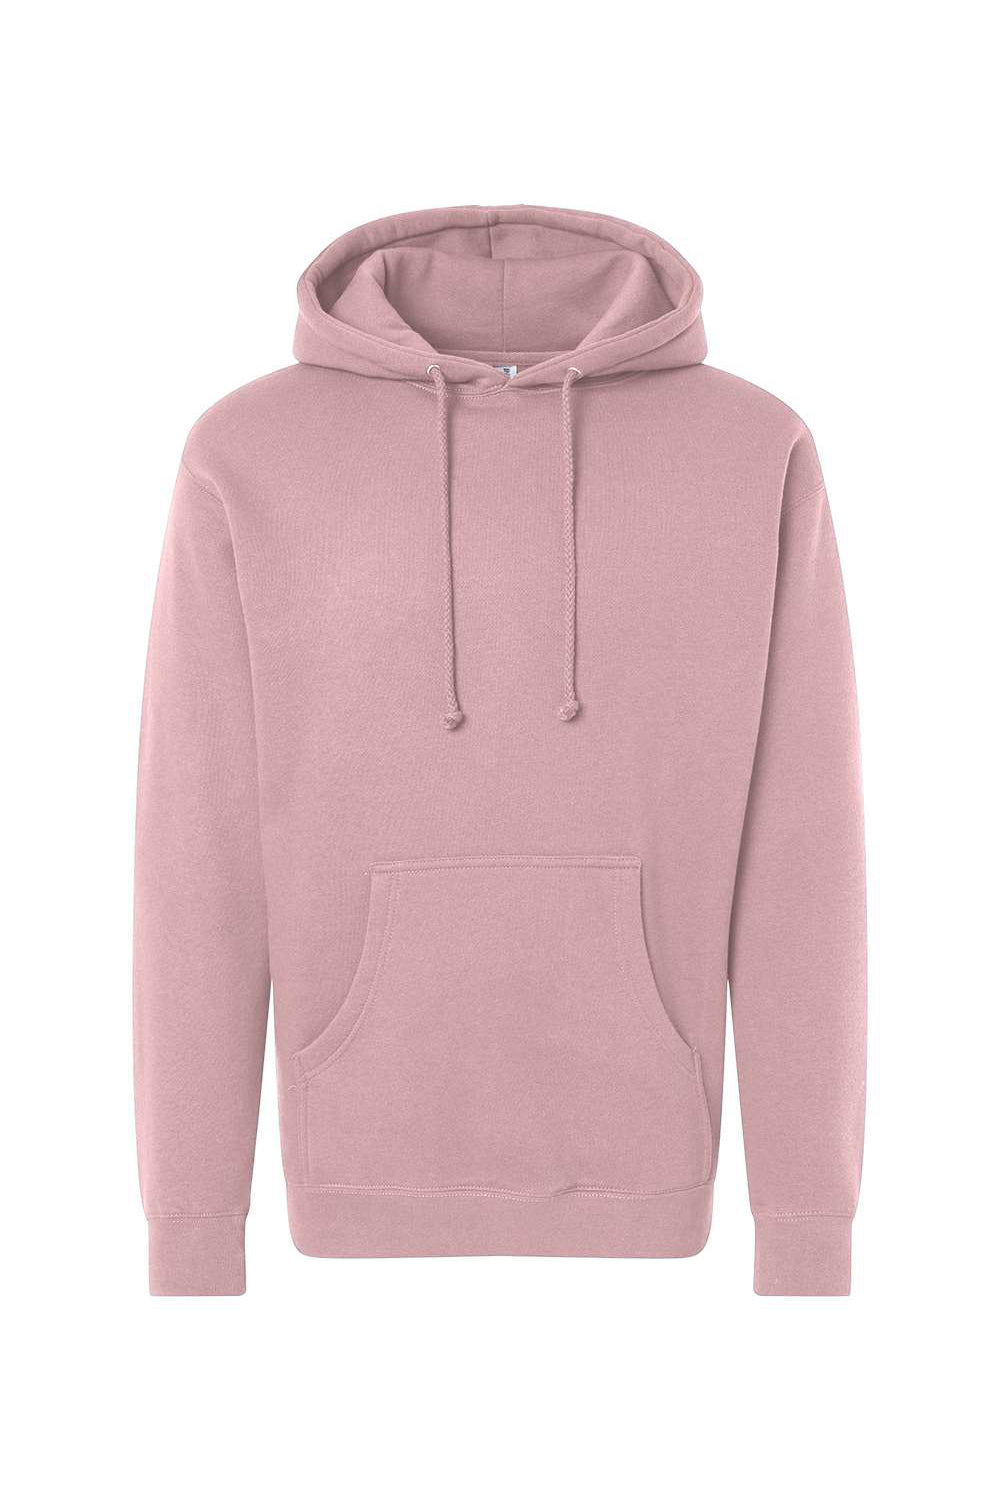 Independent Trading Co. IND4000 Mens Hooded Sweatshirt Hoodie Dusty Pink Flat Front